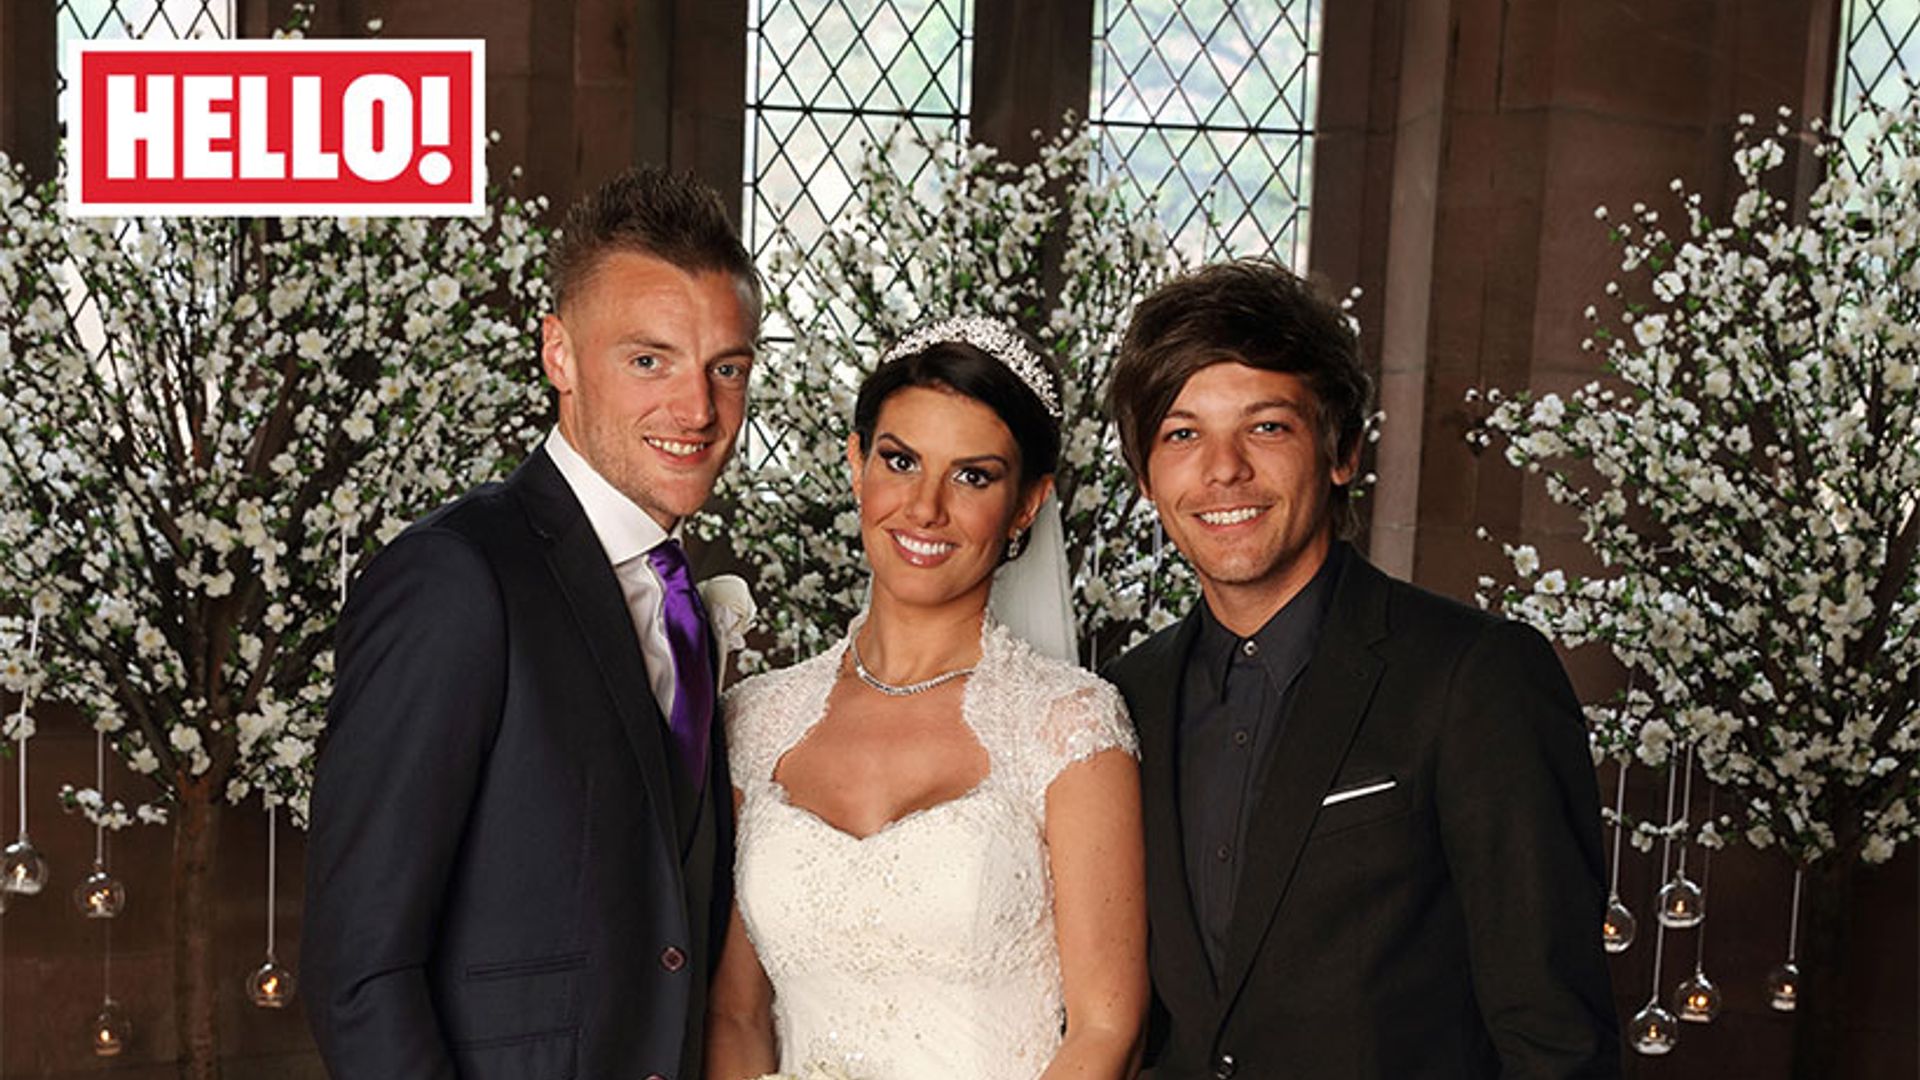 Rebekah Vardy's stunning wedding dress had a royal touch – see photos